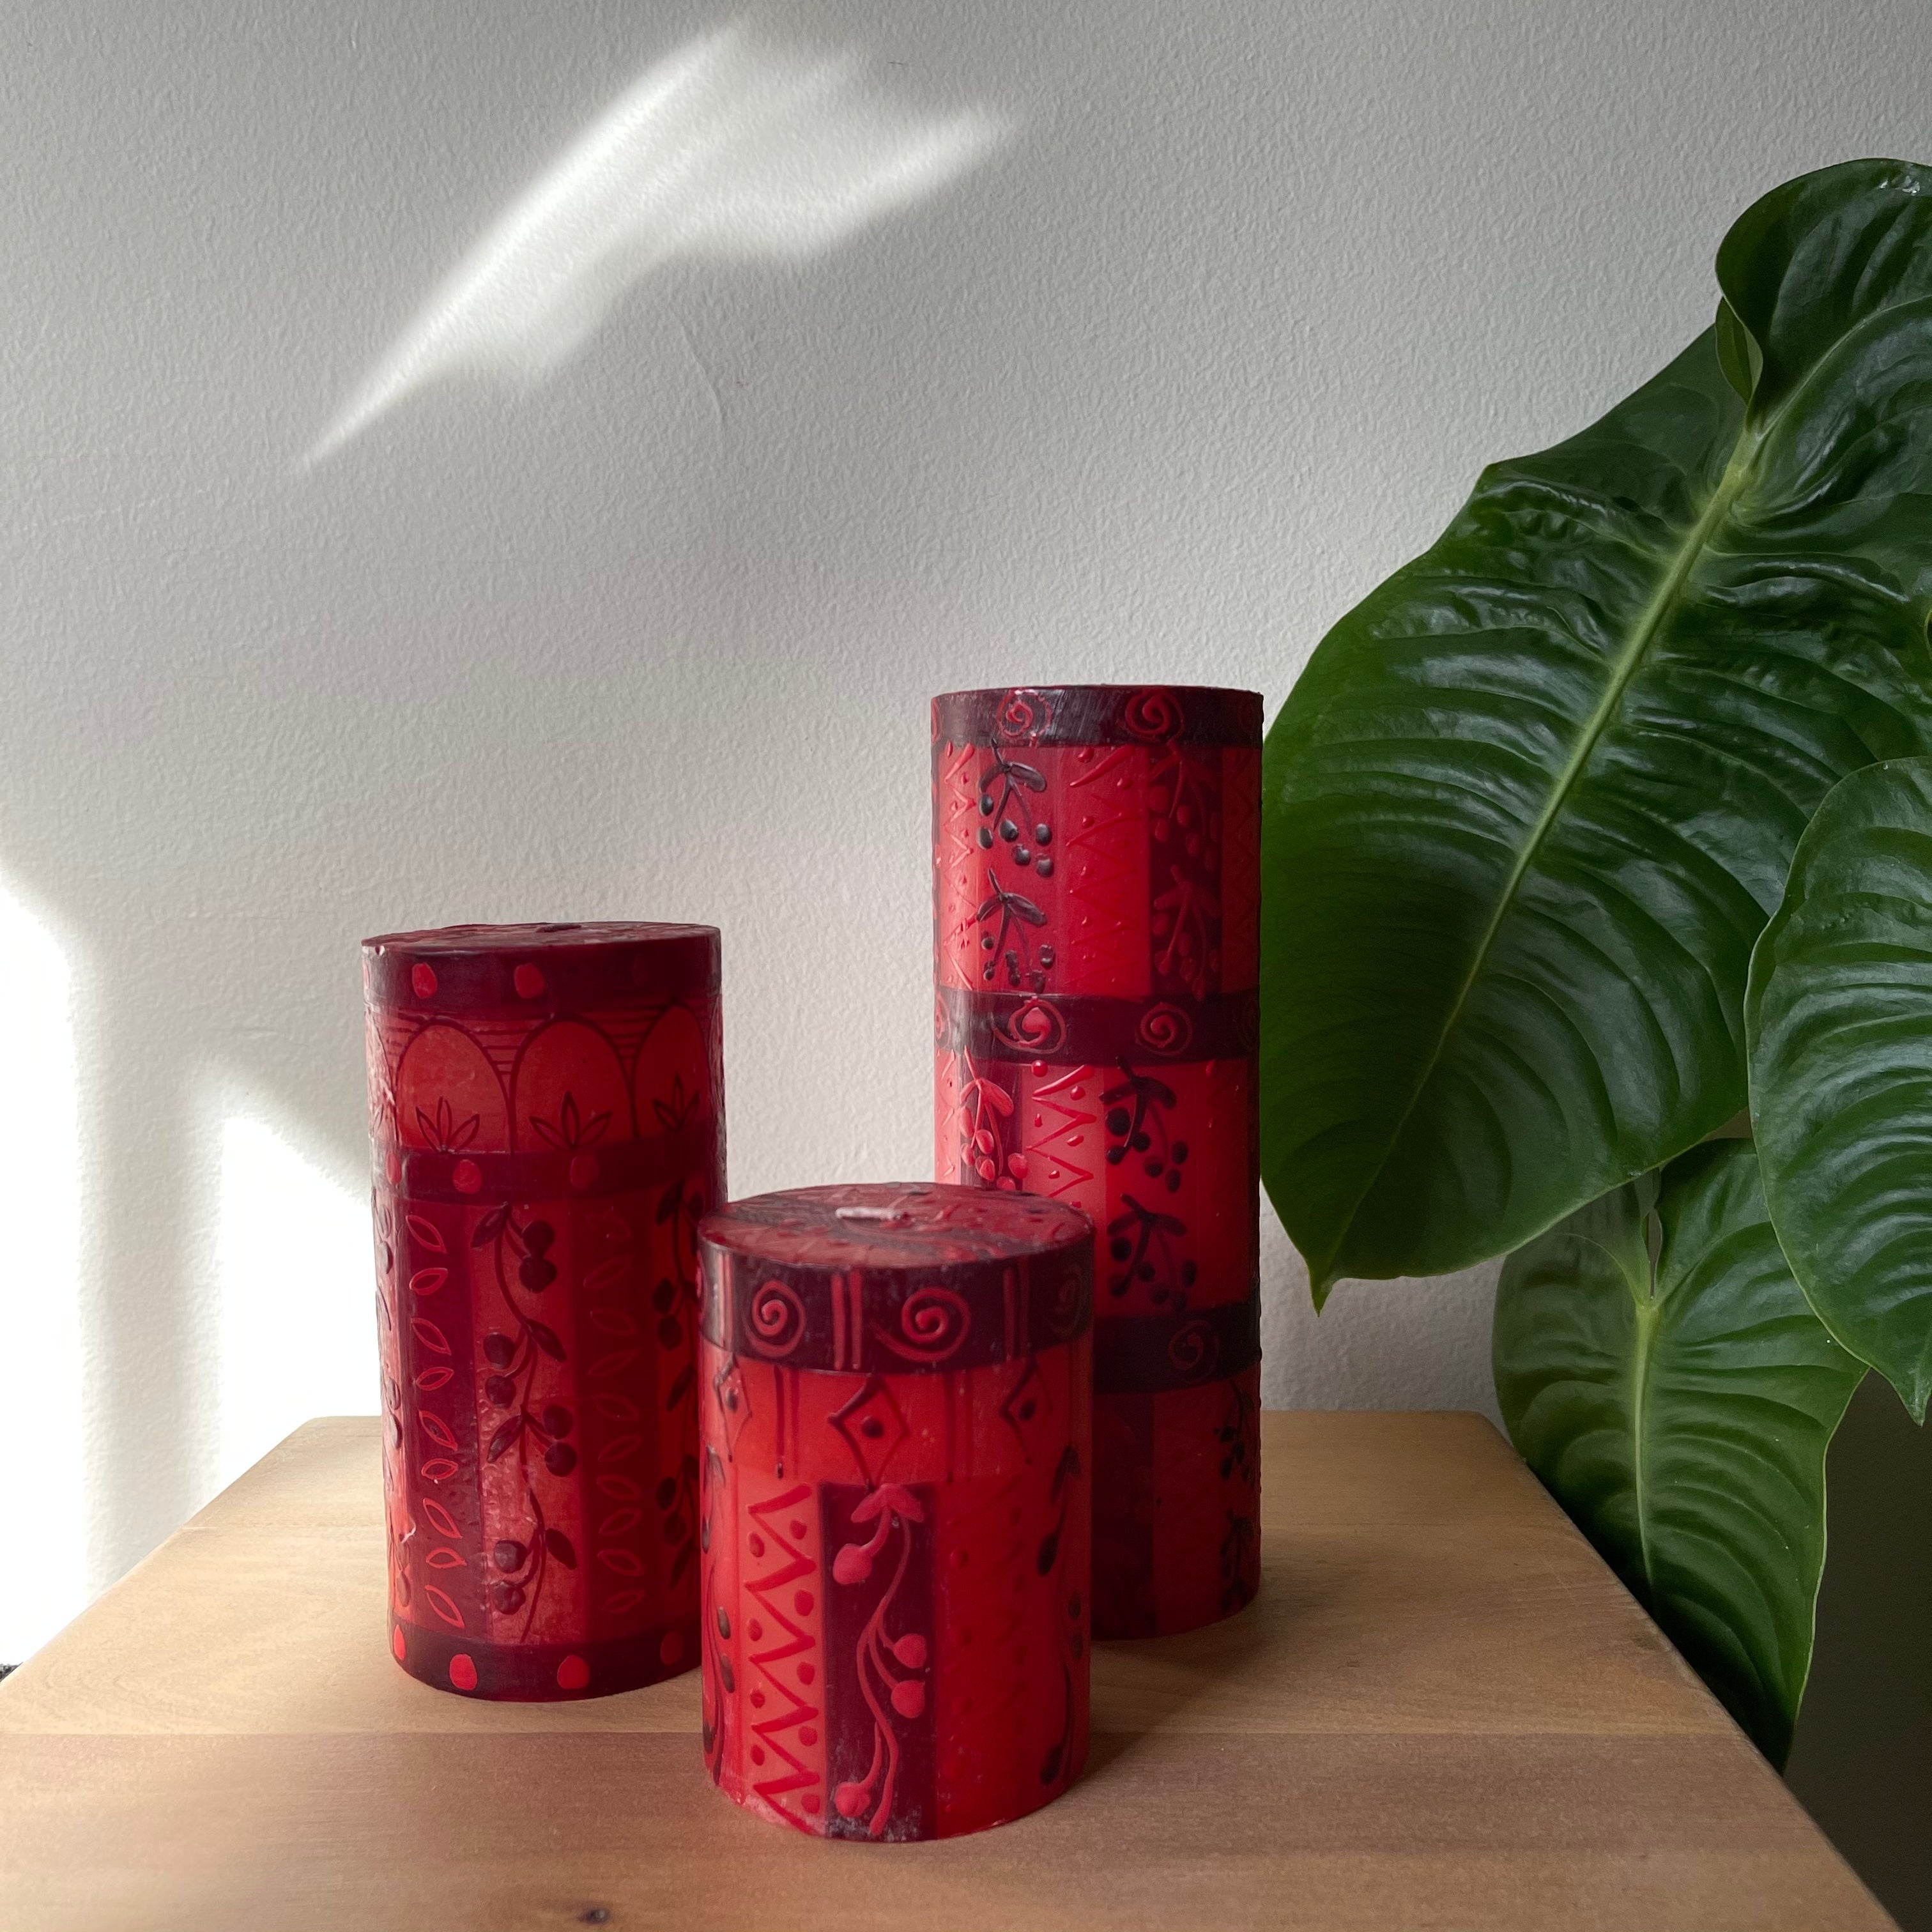 Three Berry Blaze pillars.  3x4, 3x6, and 3x8 inches.  Hand painted in hews of red with a berry pattern.